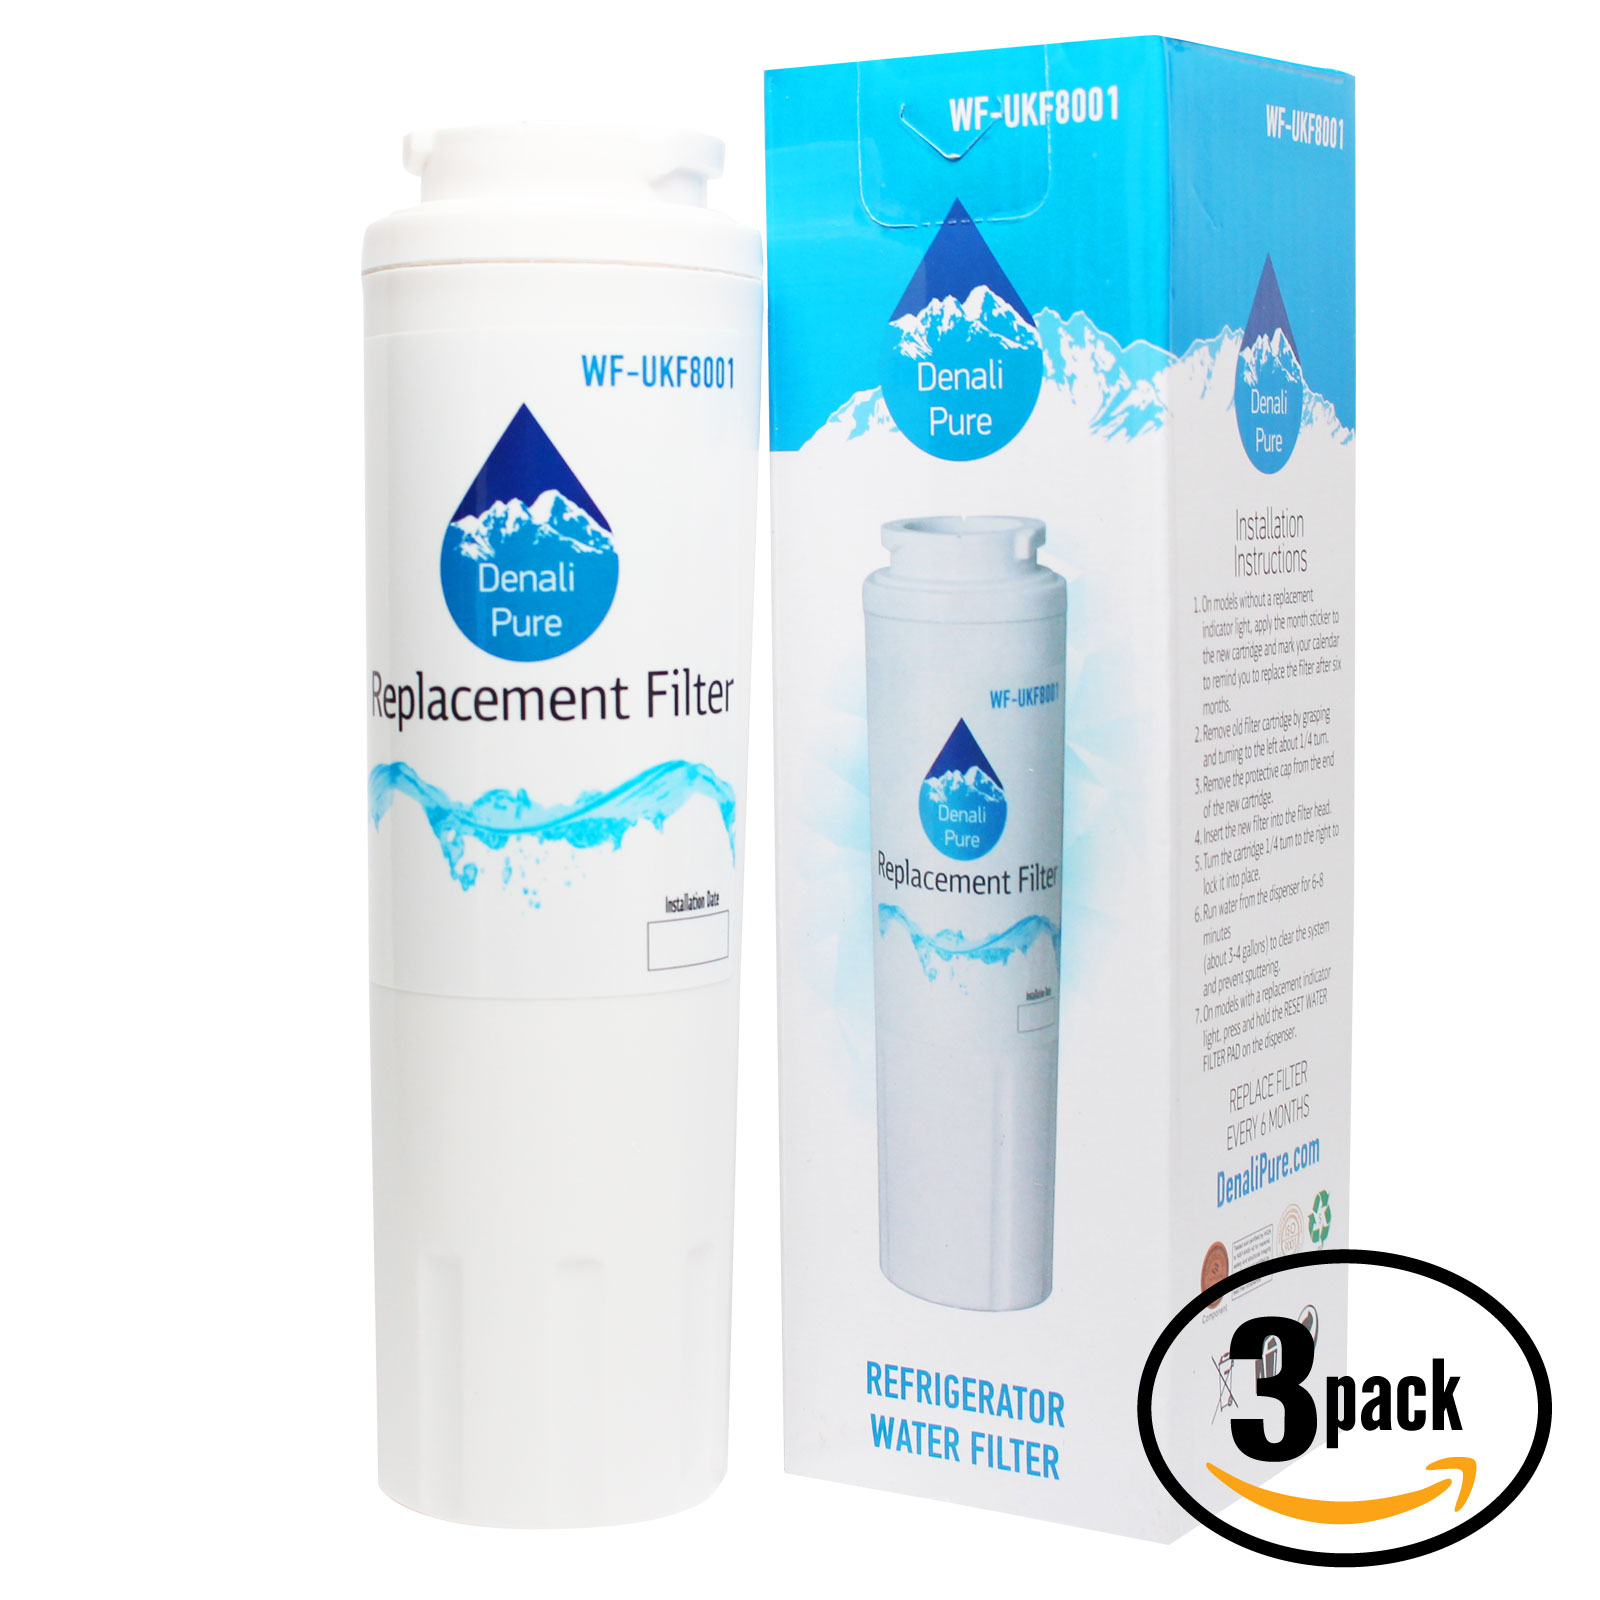 2-Pack Replacement for KitchenAid KFIS20XVMS7 Refrigerator Water Filter - Compatible with KitchenAid 4396395 Fridge Water Filter Cartridge - Denali Pure Brand - image 1 of 4